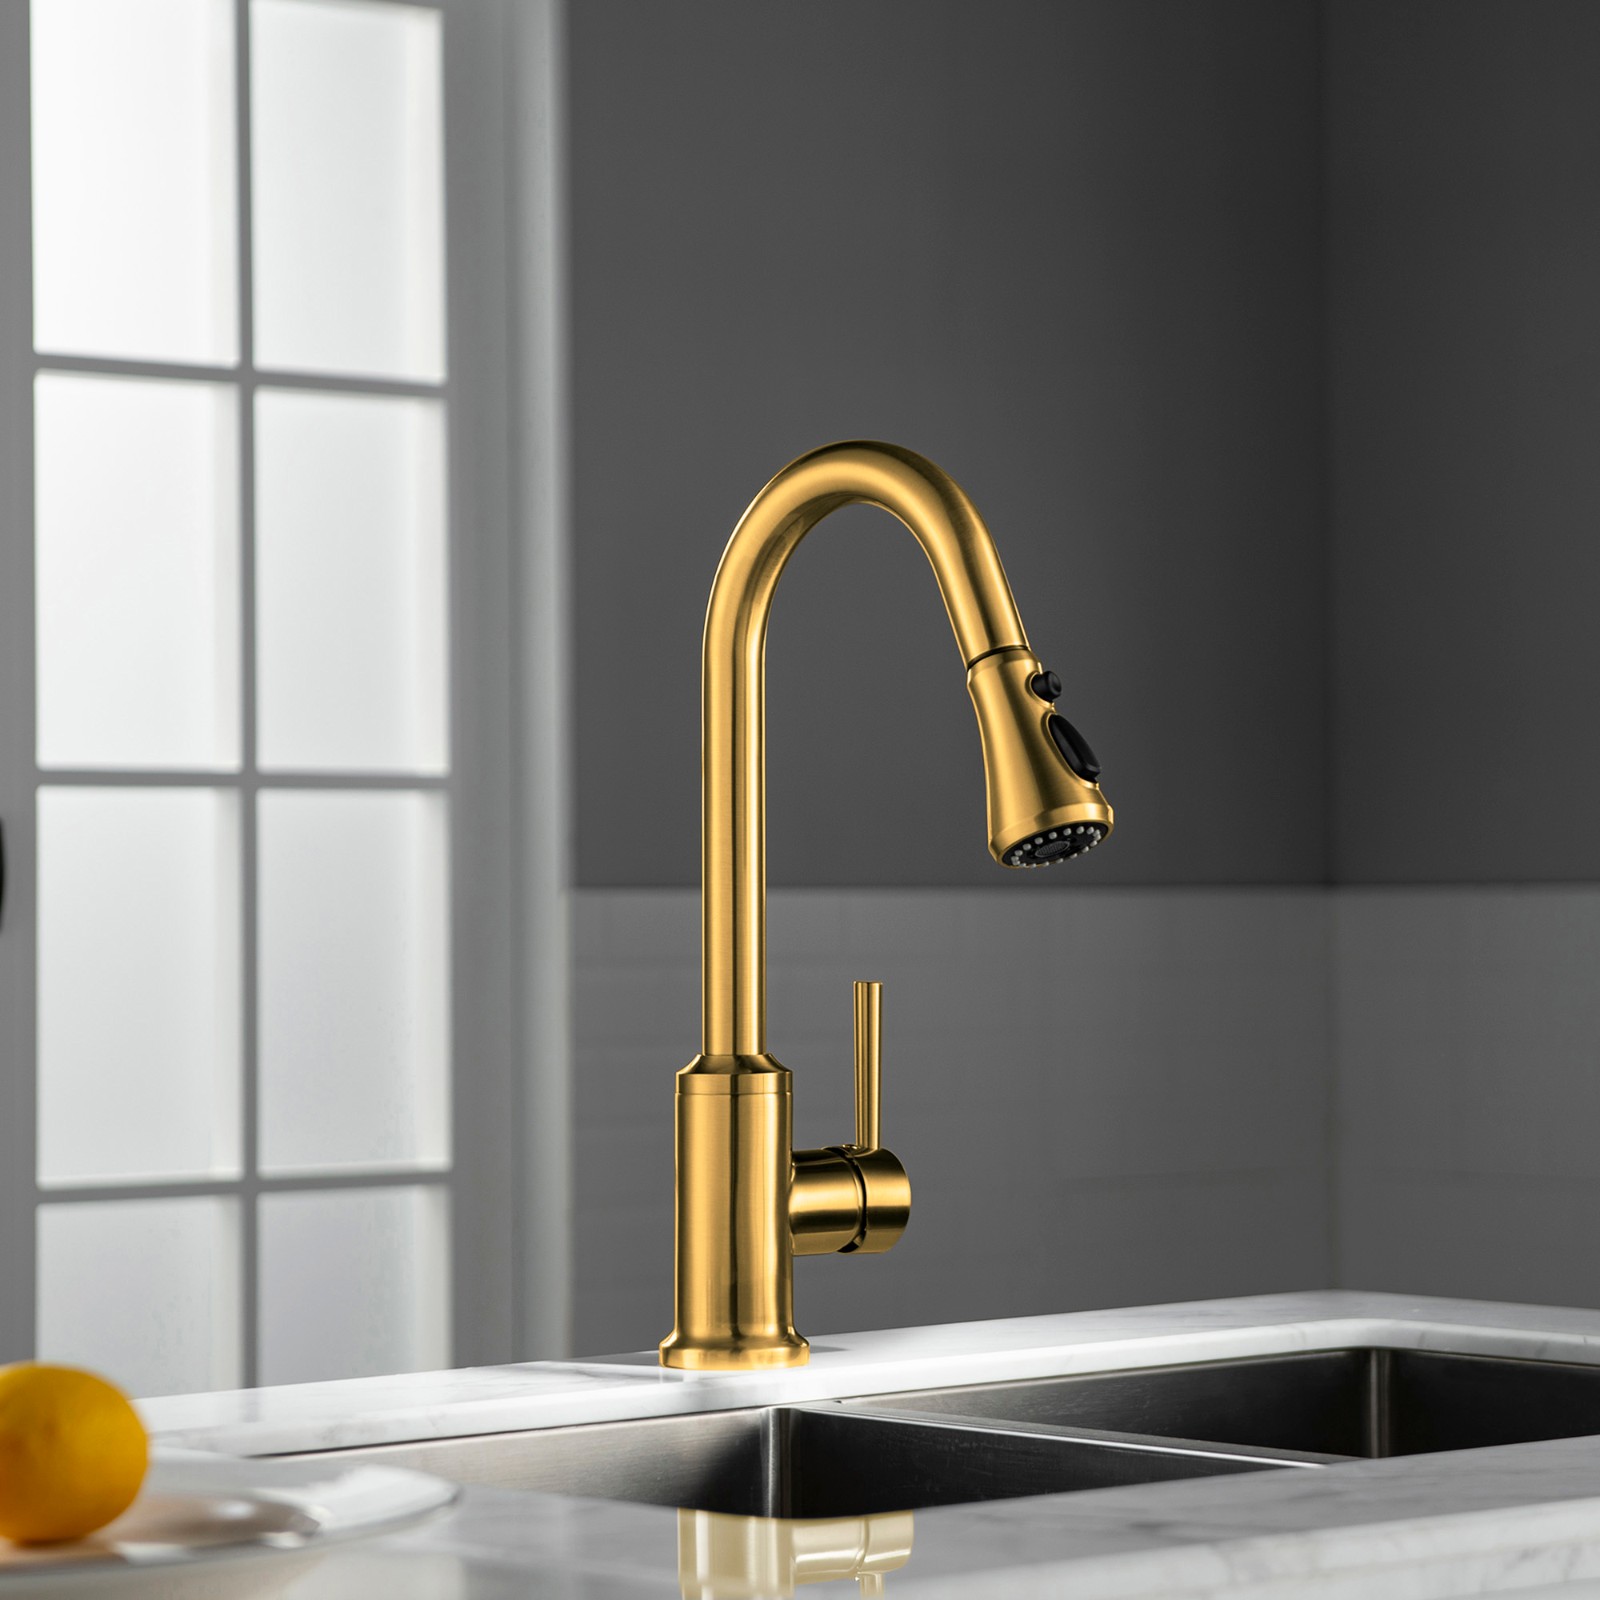  WOODBRIDGE WK101201BG Stainless Steel Single Handle Pull Down Kitchen Faucet in Brushed Gold Finish._4997